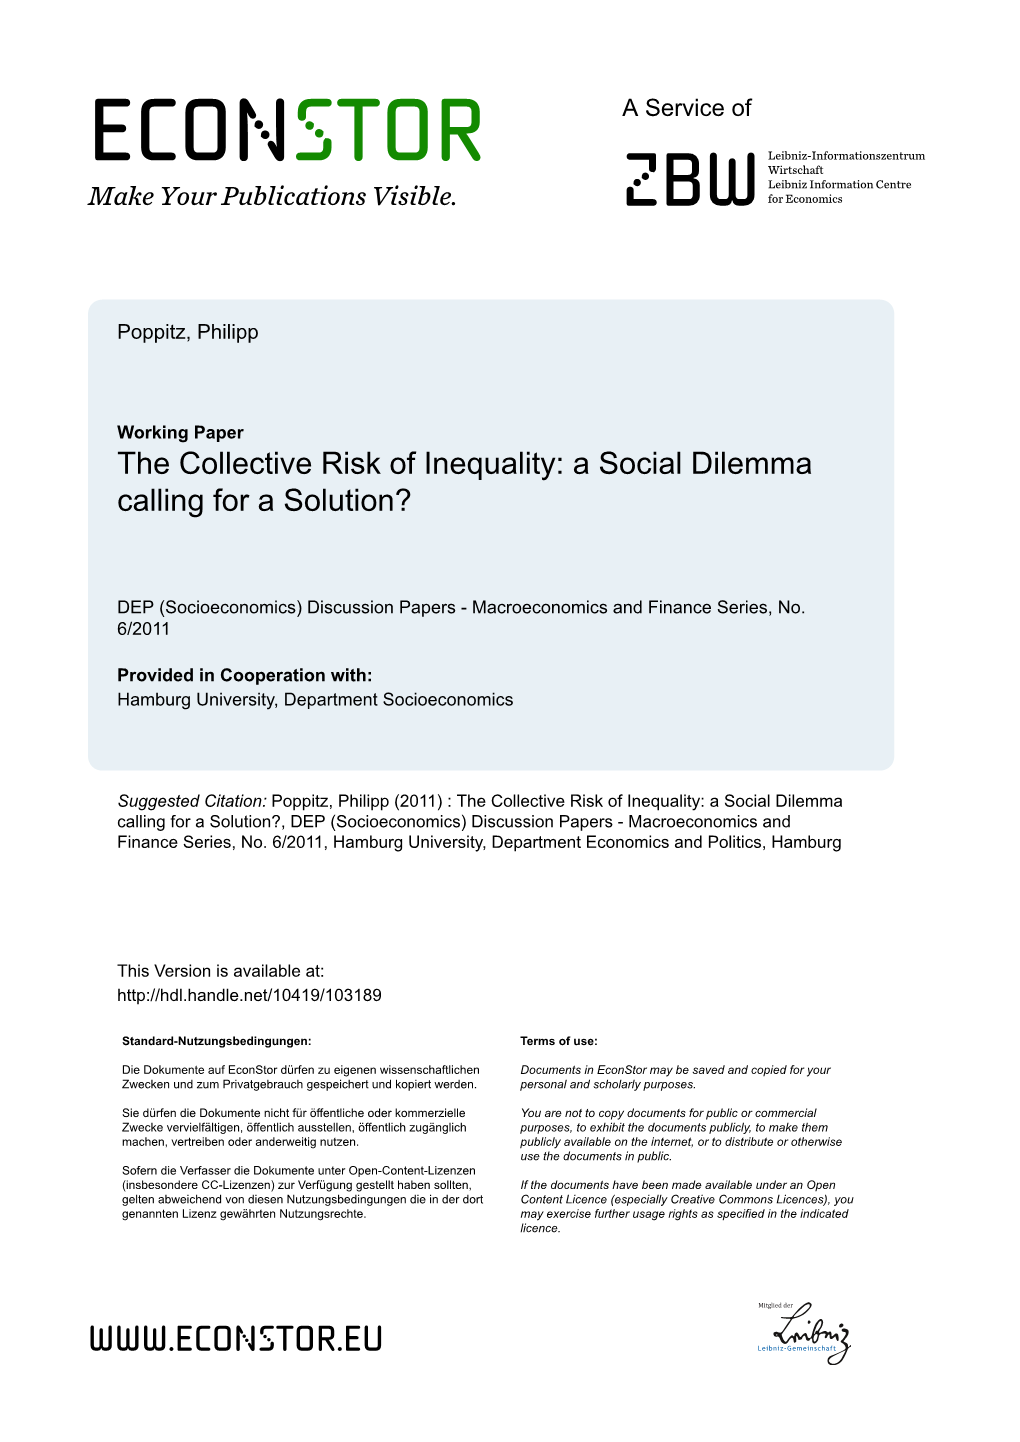 The Collective Risk of Inequality: a Social Dilemma Calling for a Solution?